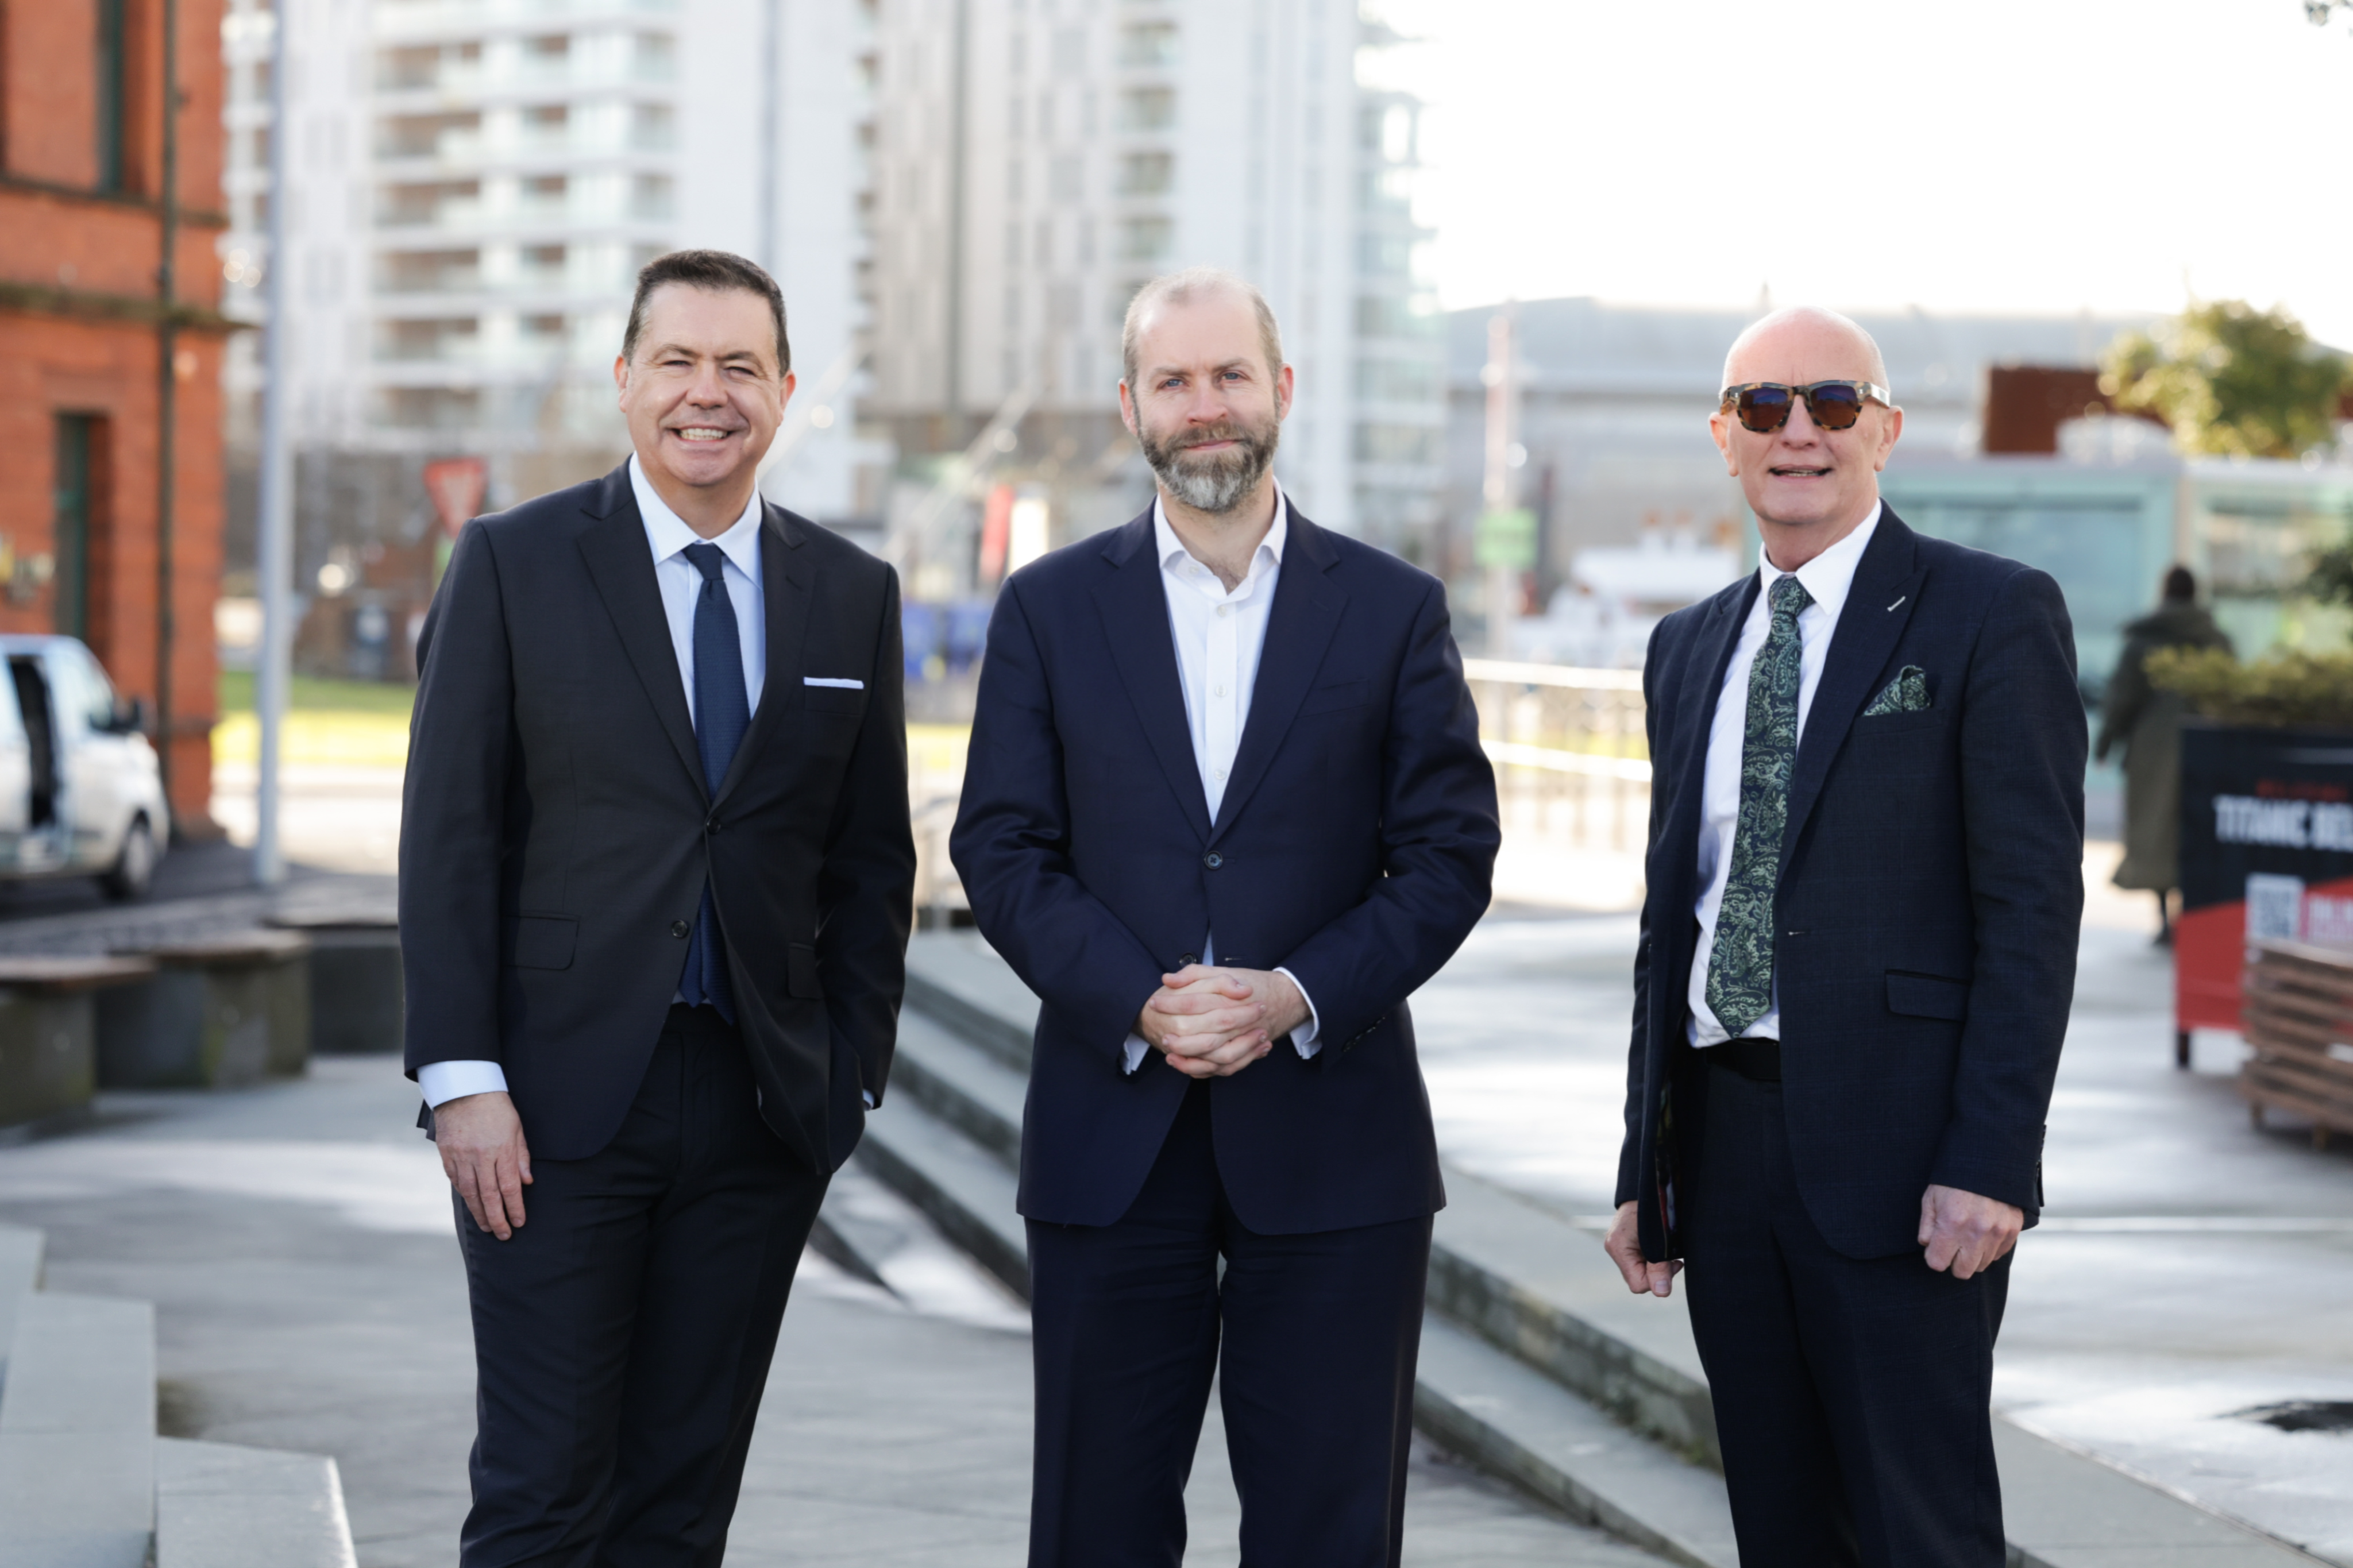 Trade NI Hosts NI Visit for Shadow Secretary of State for Business and Trade